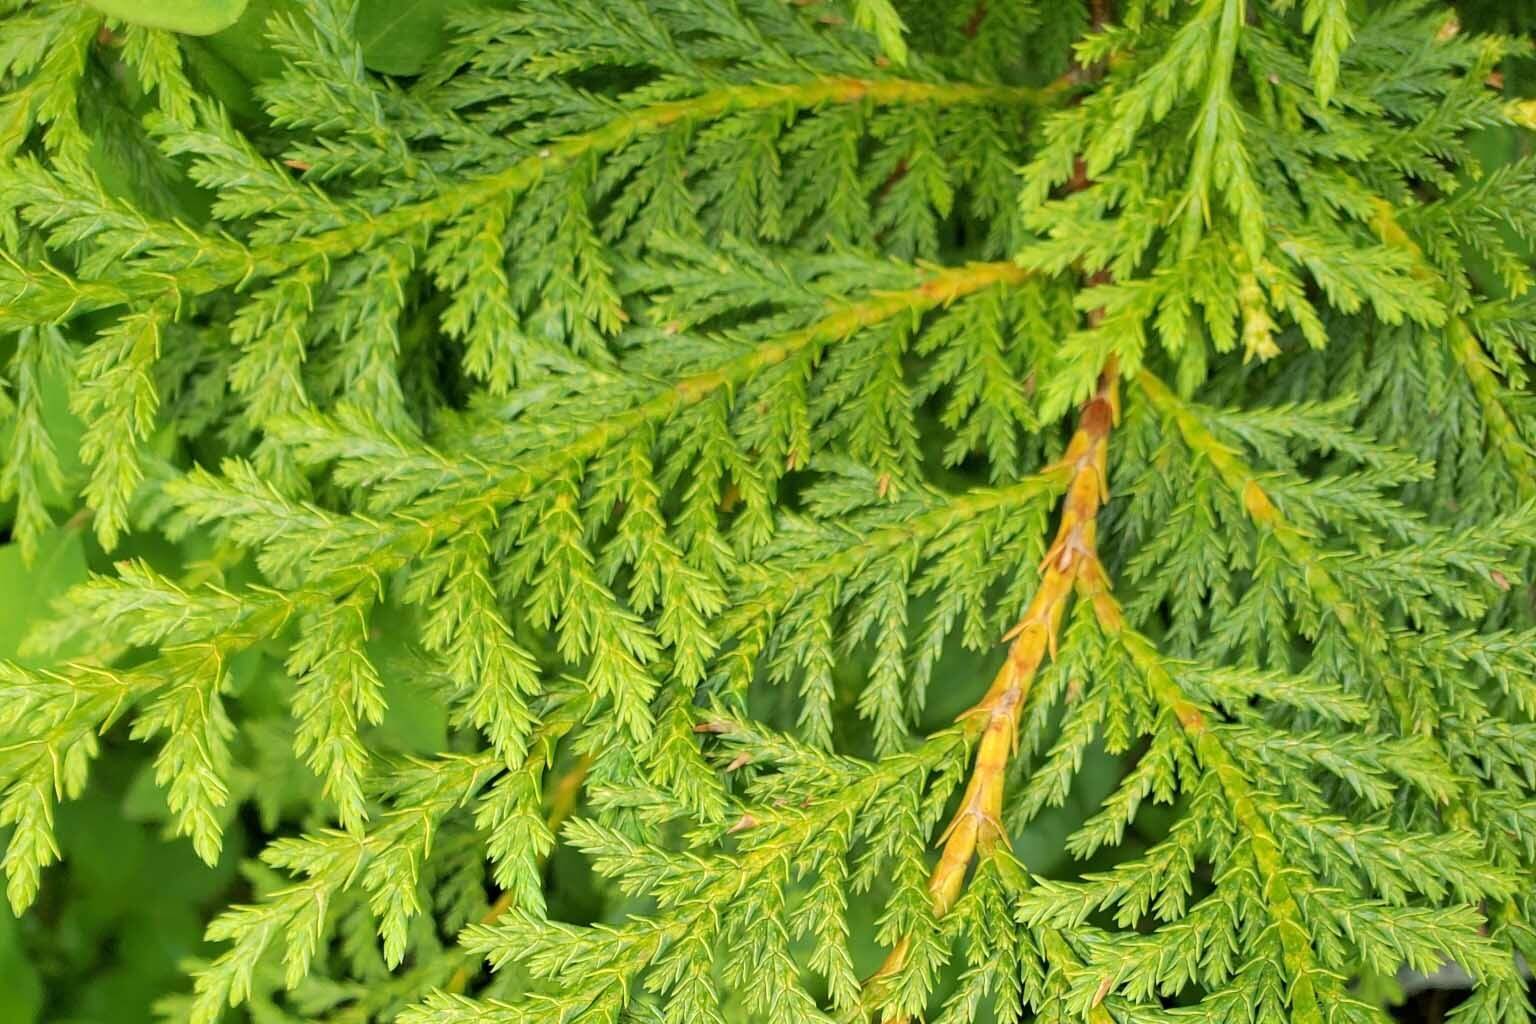 Scaly, pale green leaves of a yellow-cedar near Sitka, Alaska. (Photo by M. Goff http://www.sitkanature.org/)